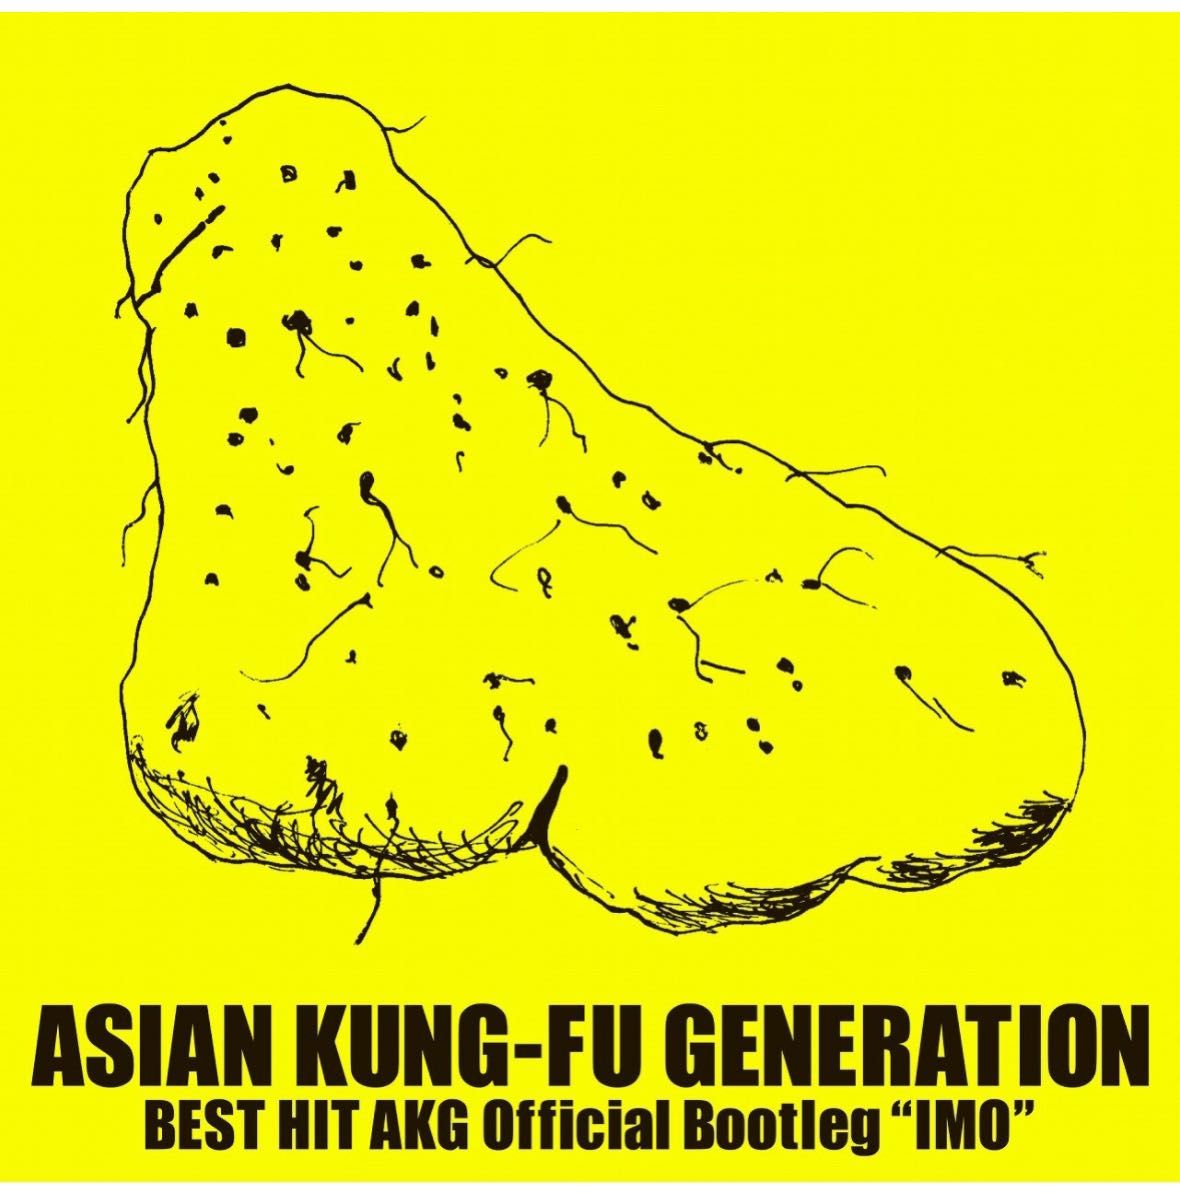 BEST HIT AKG Official Bootleg “IMO"